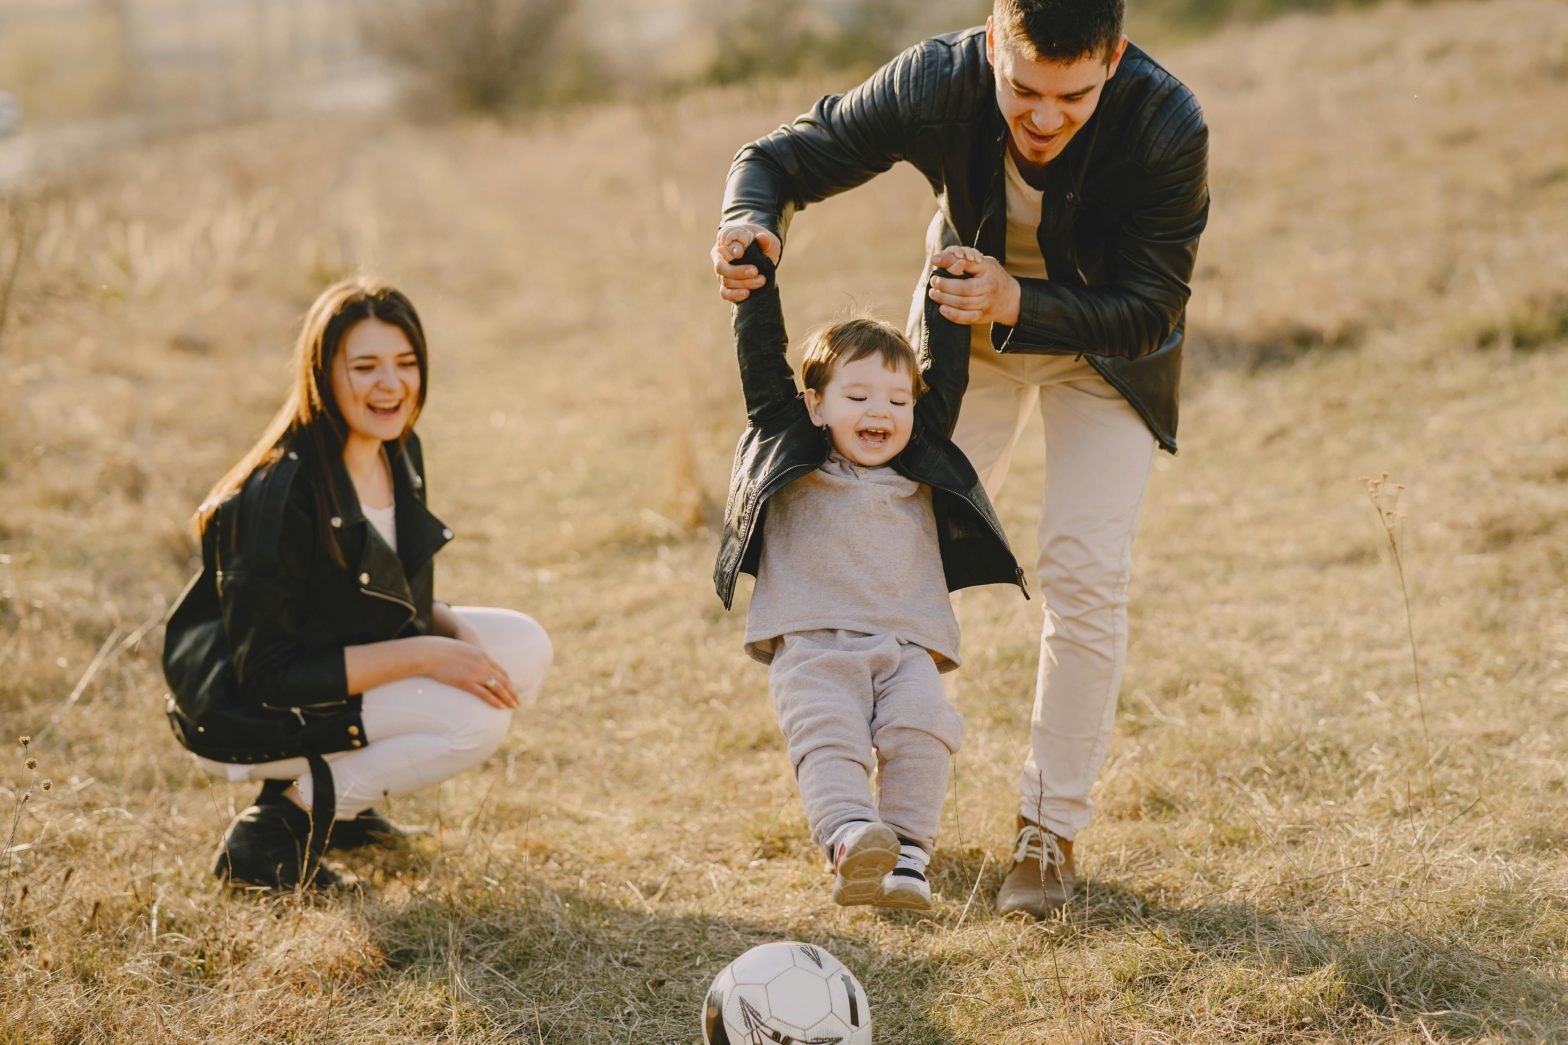 A Happy family of three, where the father is teaching the toddler to walk and the mum is looking at them with pride and joy